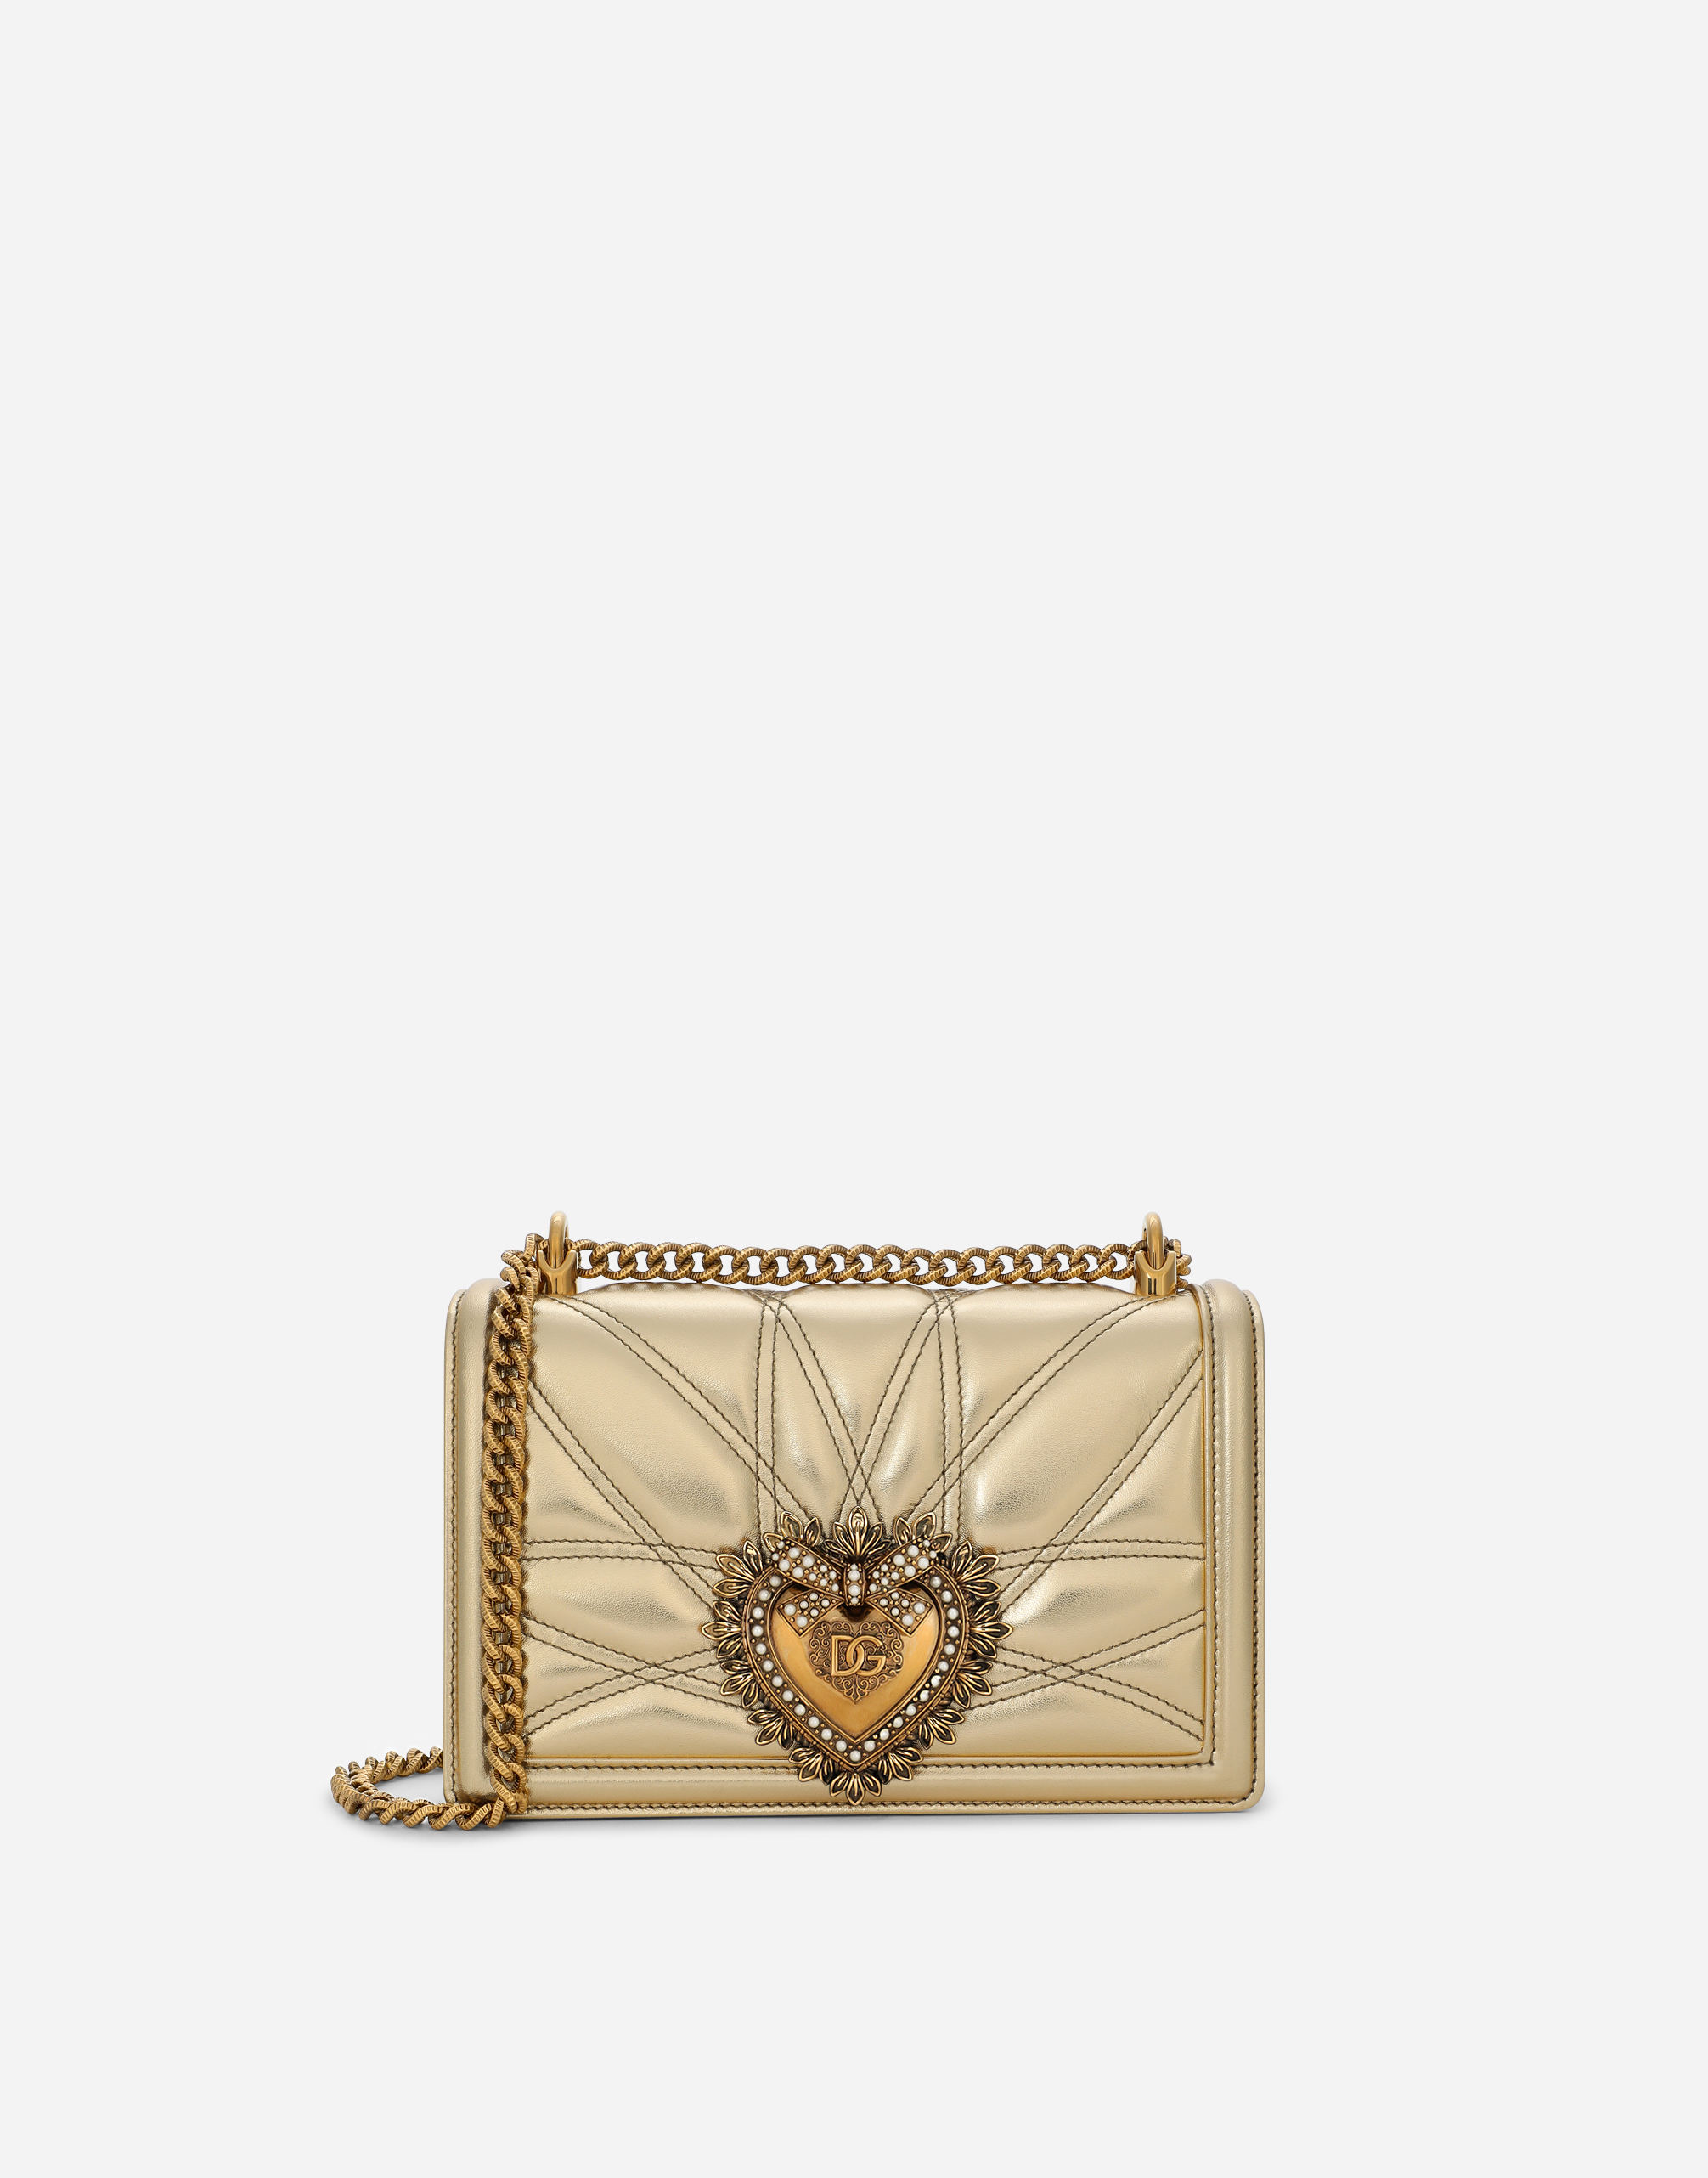 Medium Devotion bag in quilted nappa leather in Gold